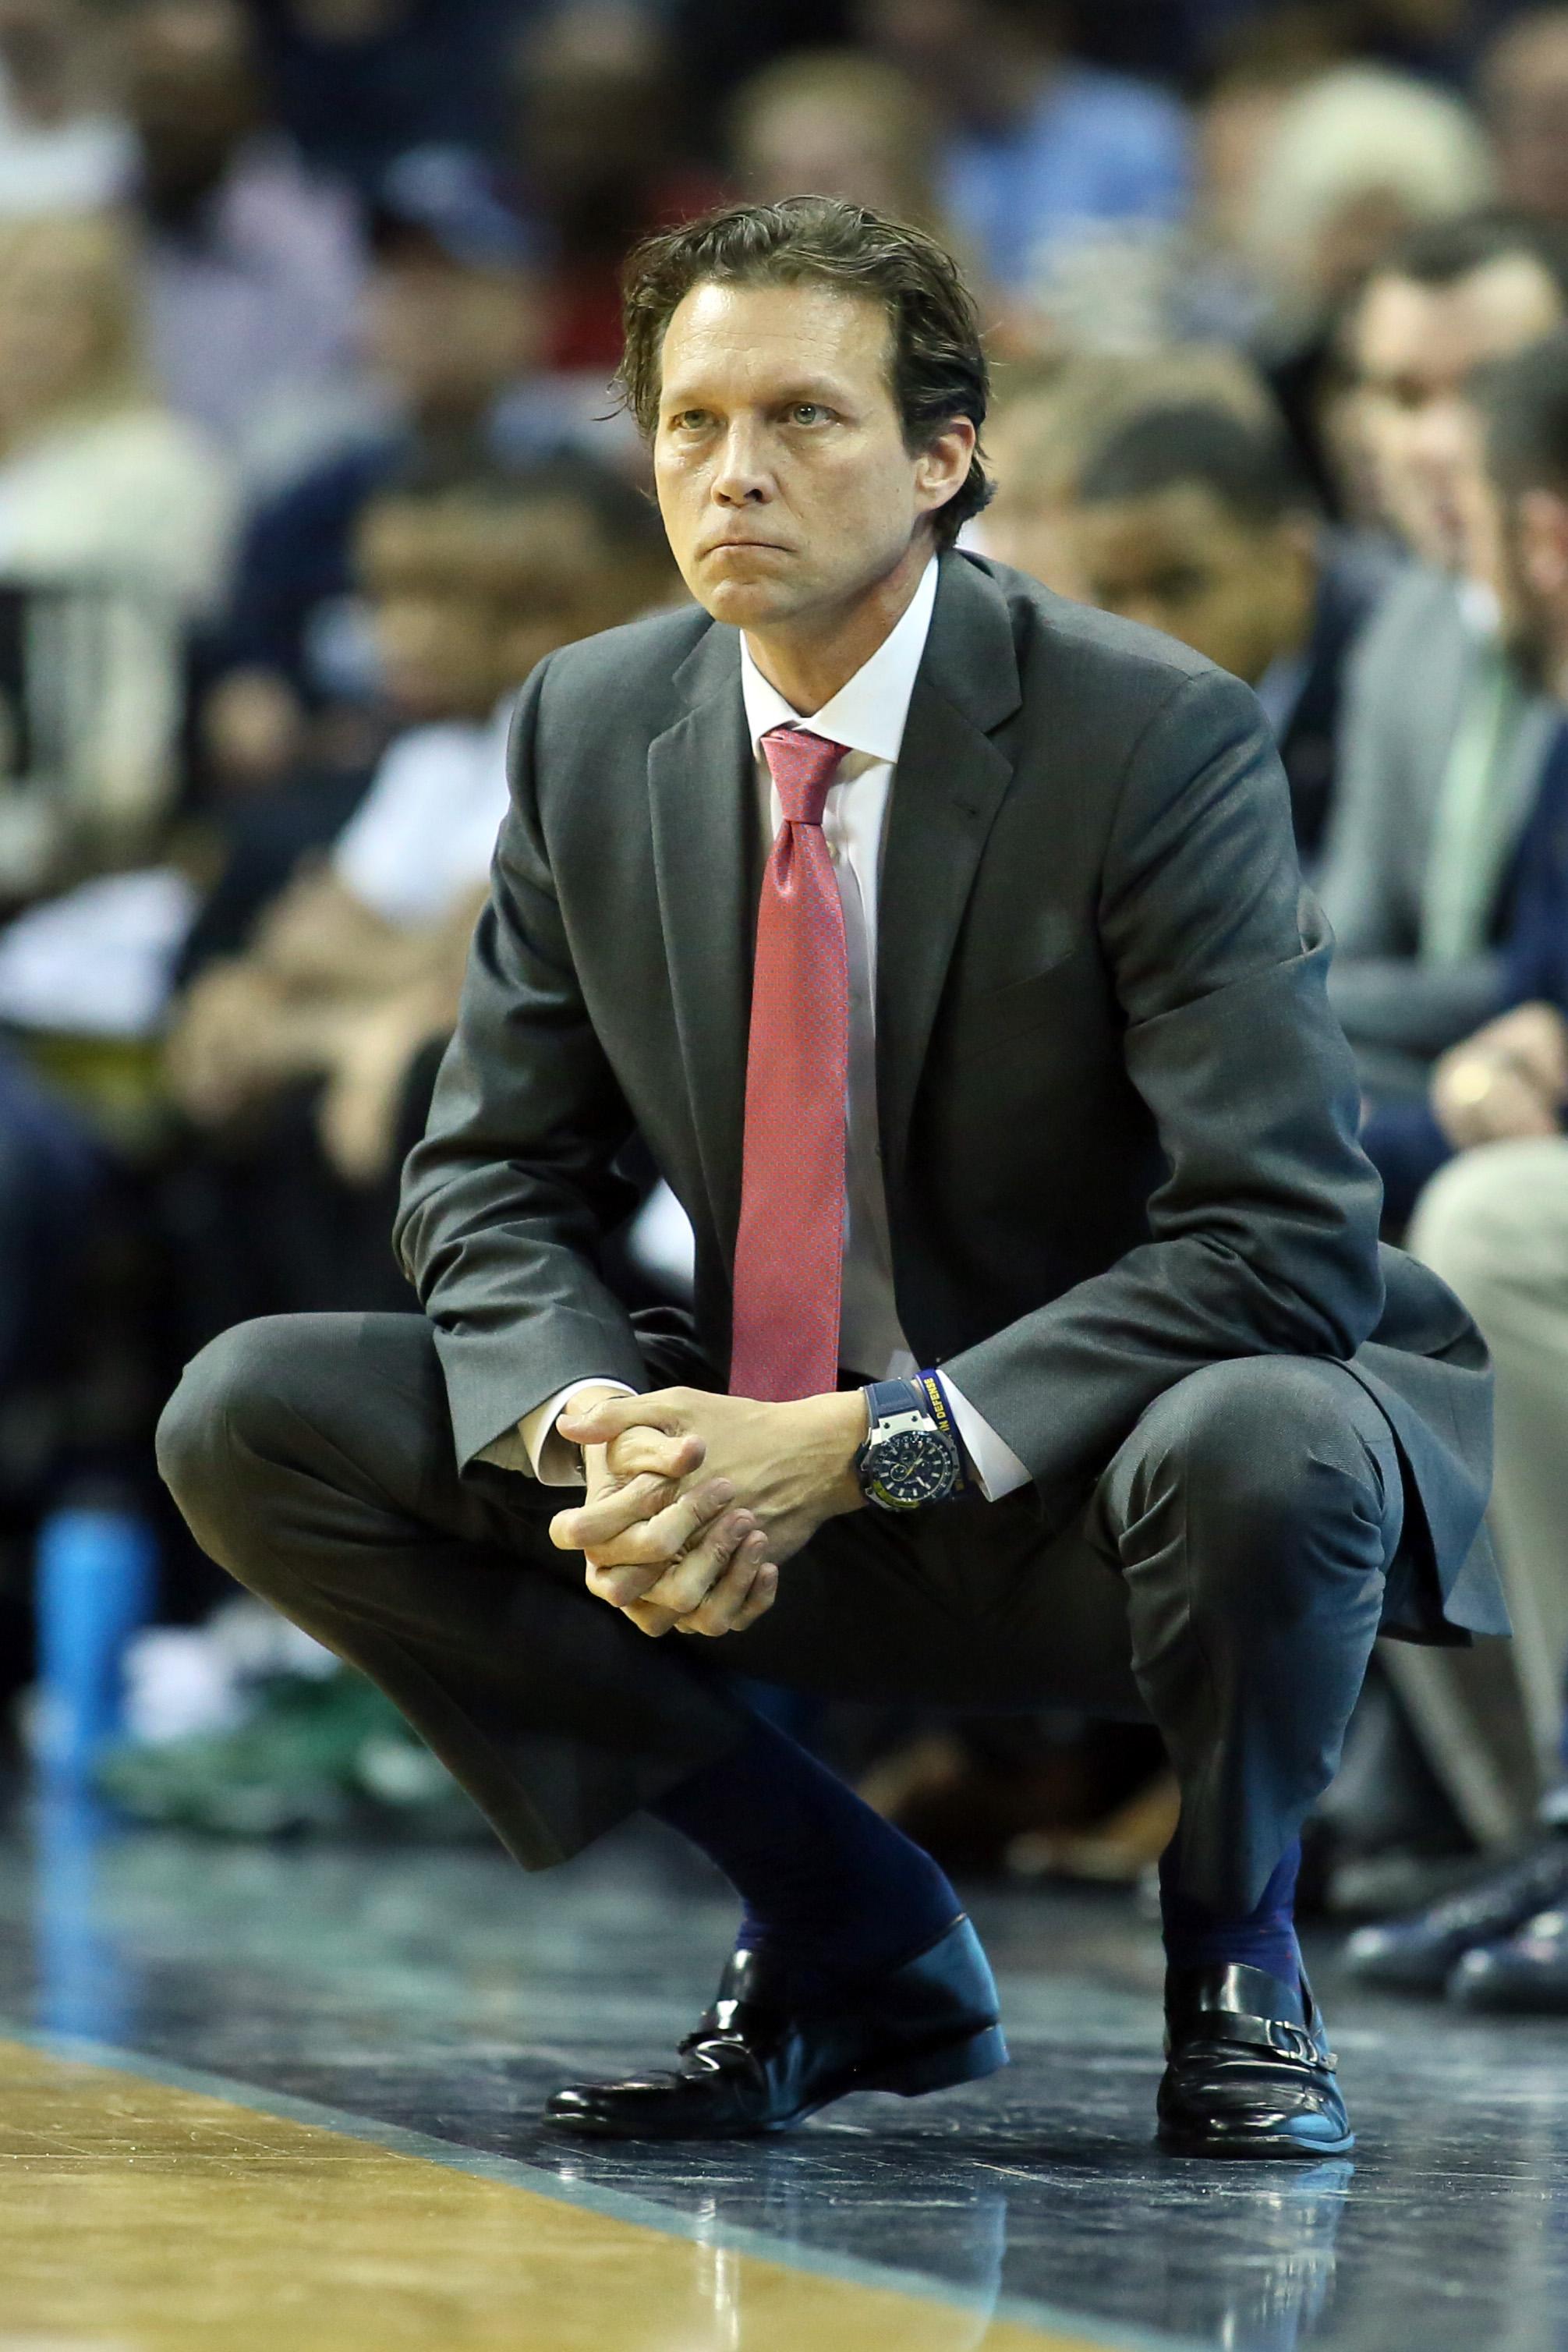 Atlanta Hawks head coach Quin Snyder looks at his notes during the